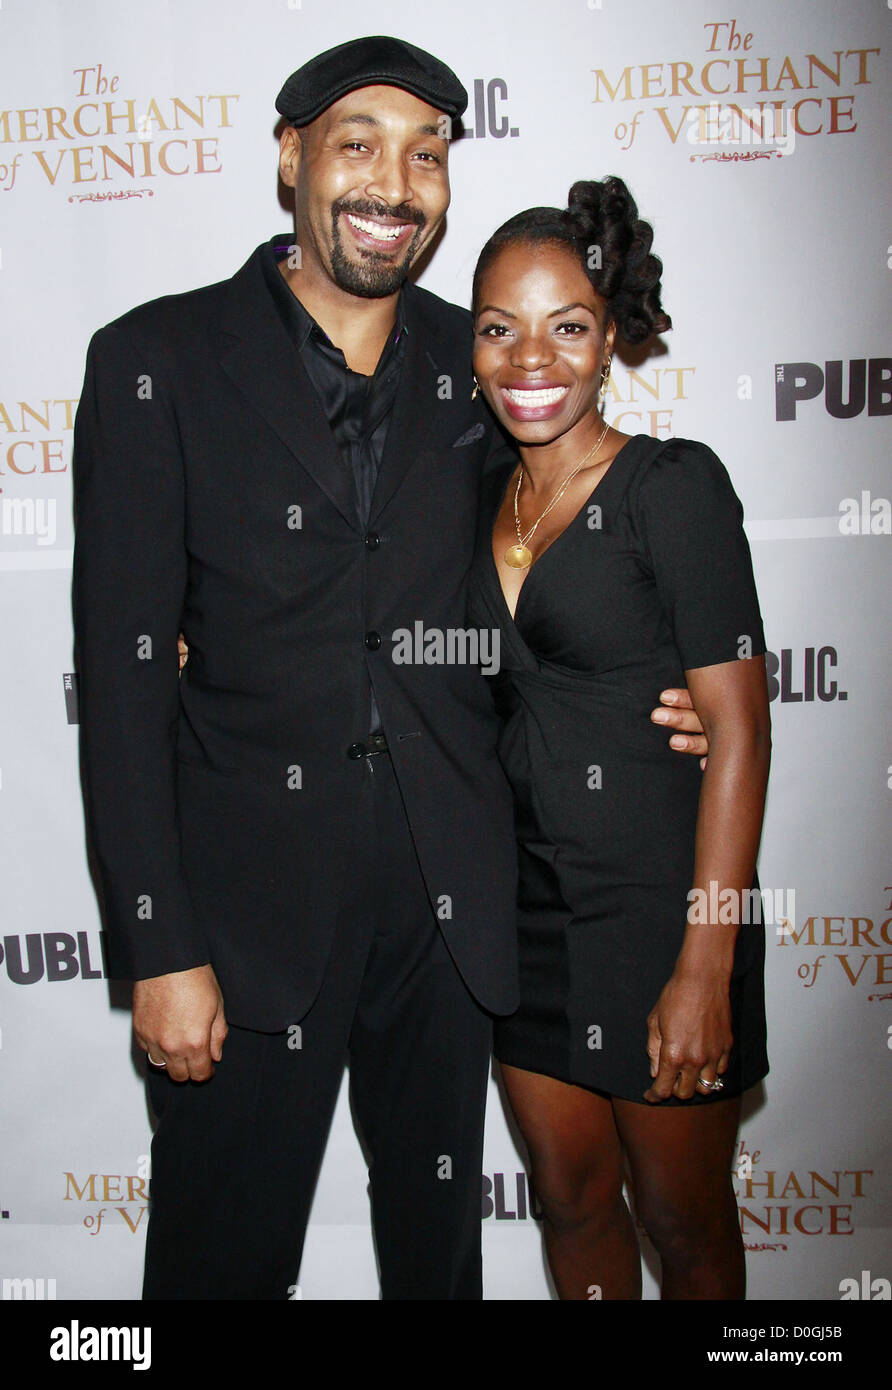 Jesse L. Martin and Marsha Stephanie Blake Opening night after party